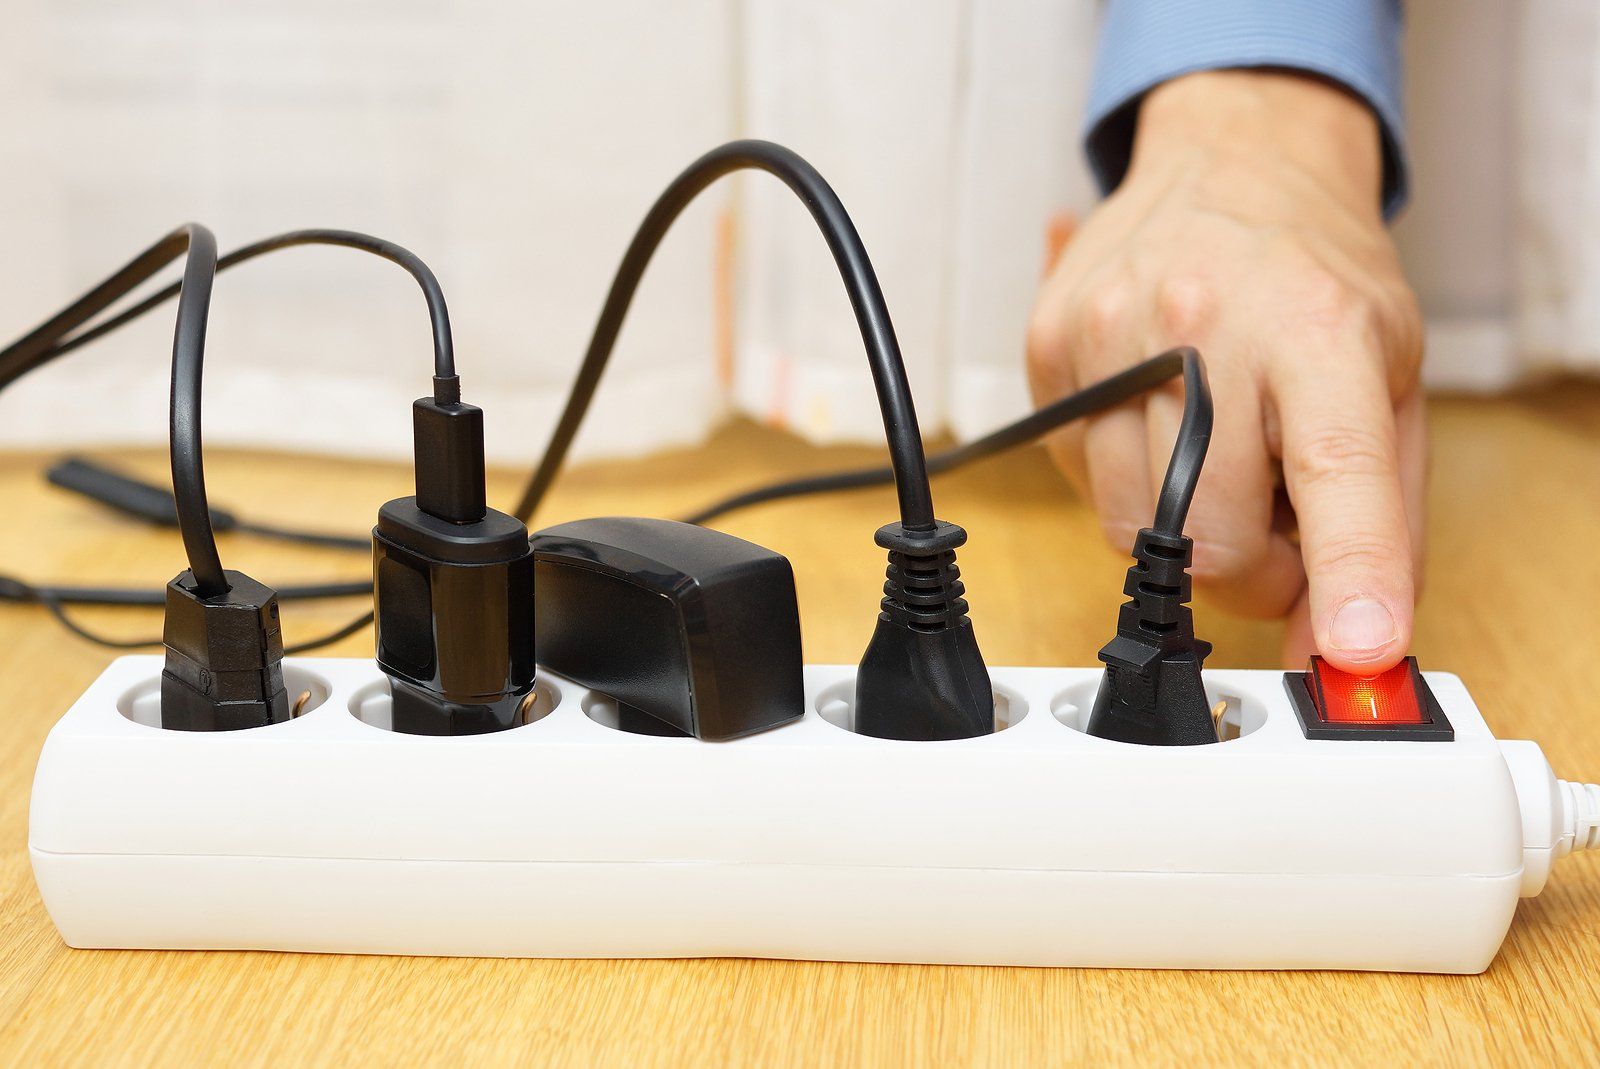 Home Safety and Surge Protection Specialists Near You